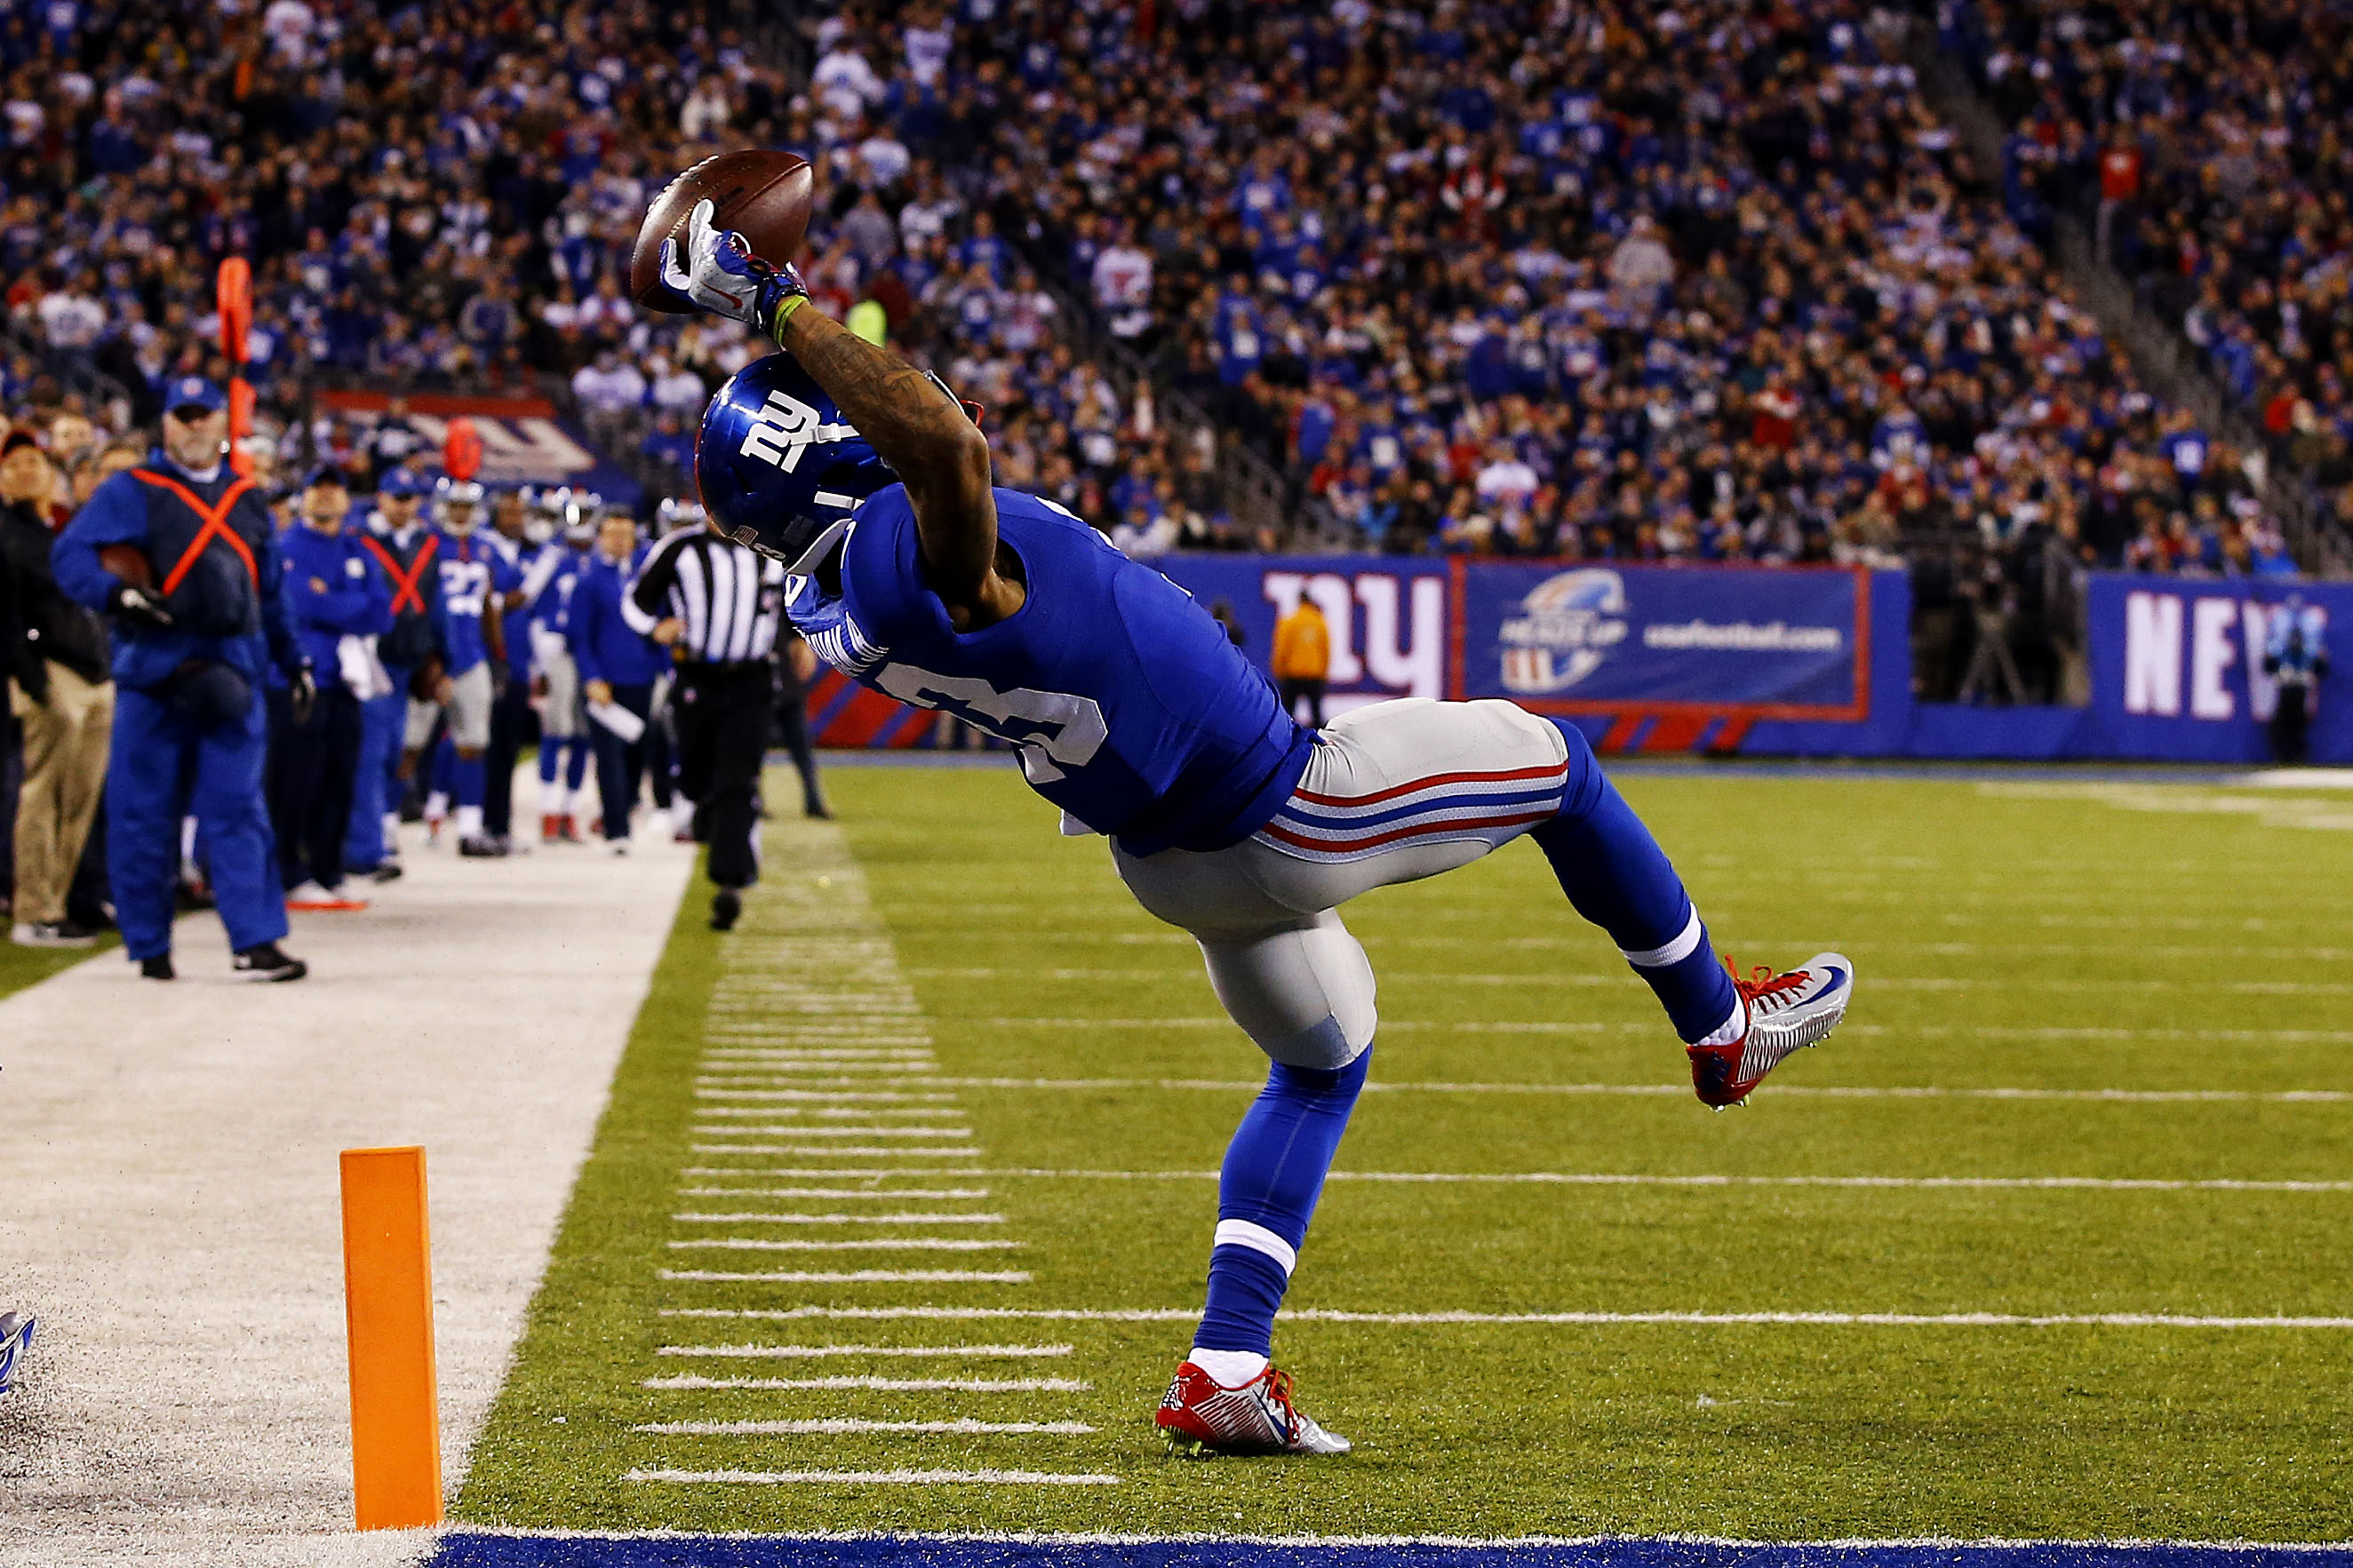 4-point plan to stop Giants receiver Odell Beckham Jr.